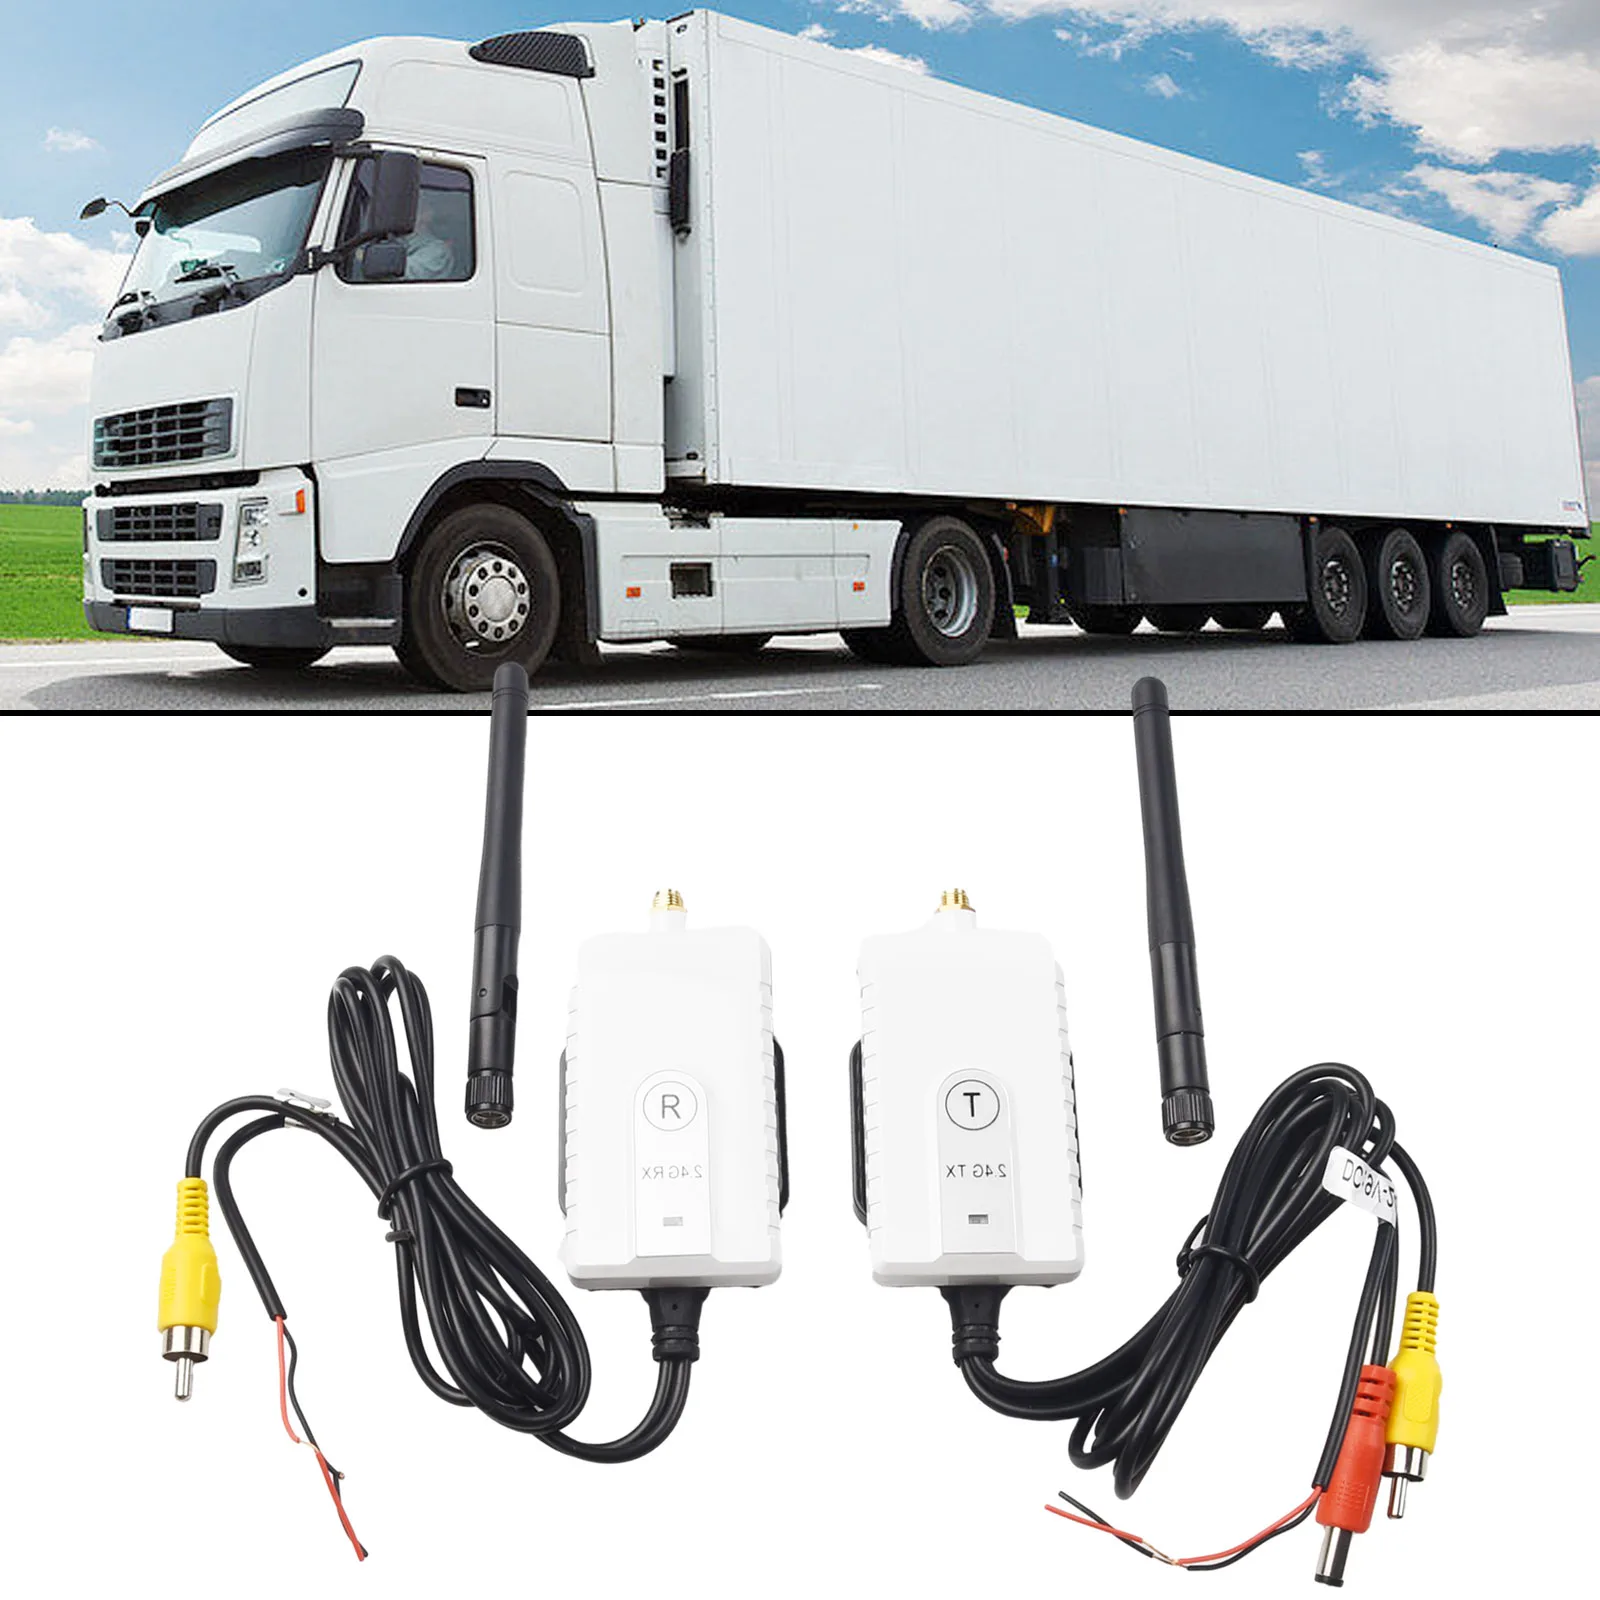 

AV Cable Transmitter Receiver, Convert Your Camera to Wireless, 2 4Ghz 200M Range, Perfect for Vehicle Rear Monitoring